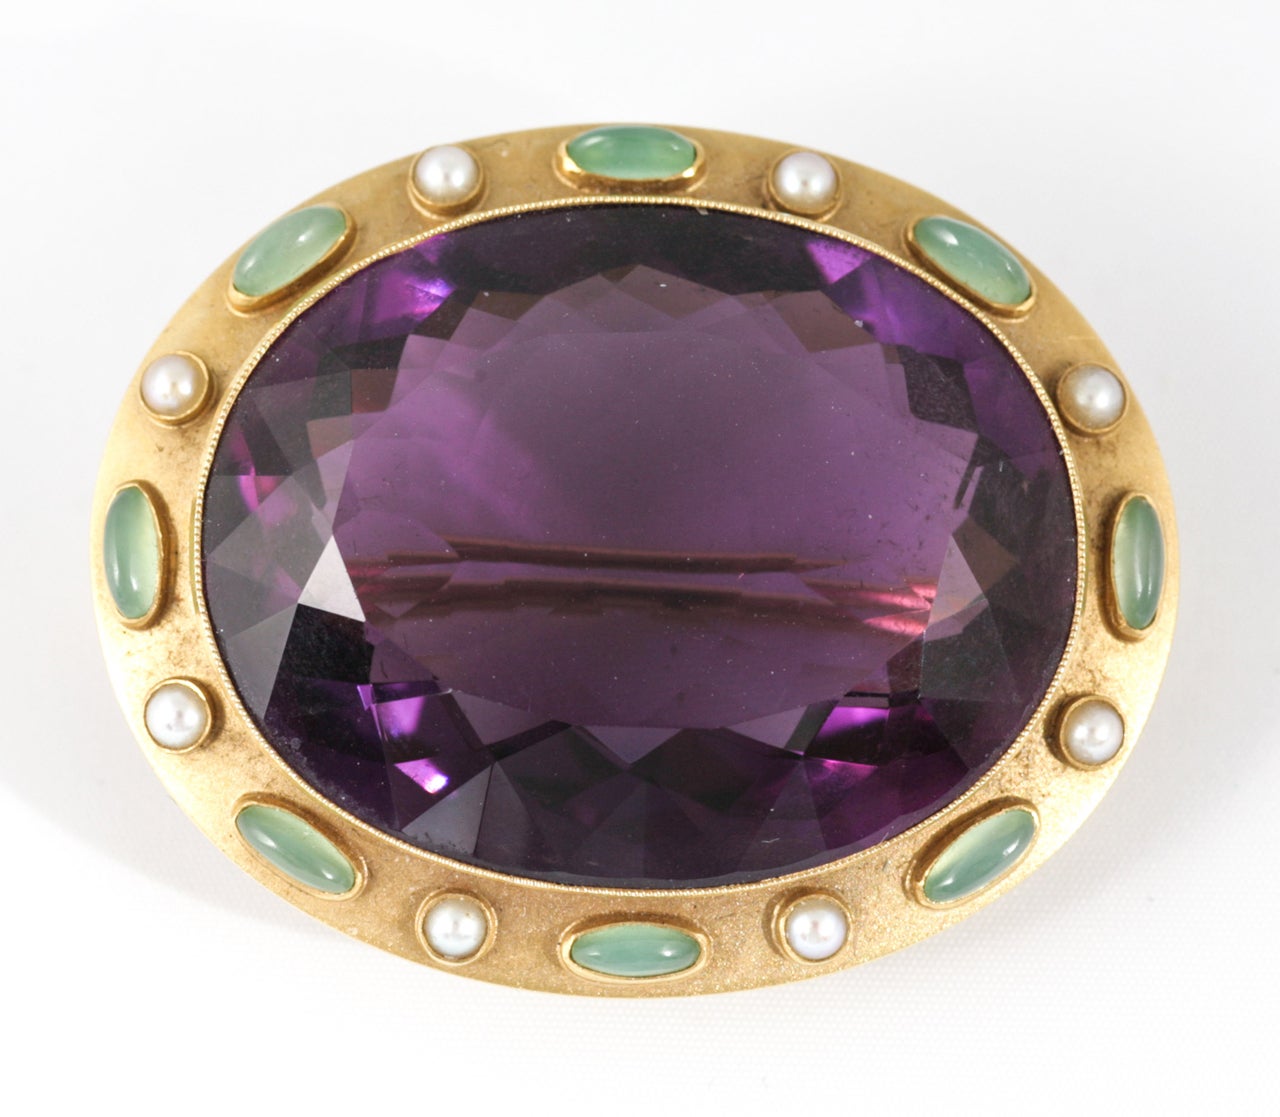 Oval Amethyst brooch set with natural Pearls and green Chalcedony in 15ct Gold